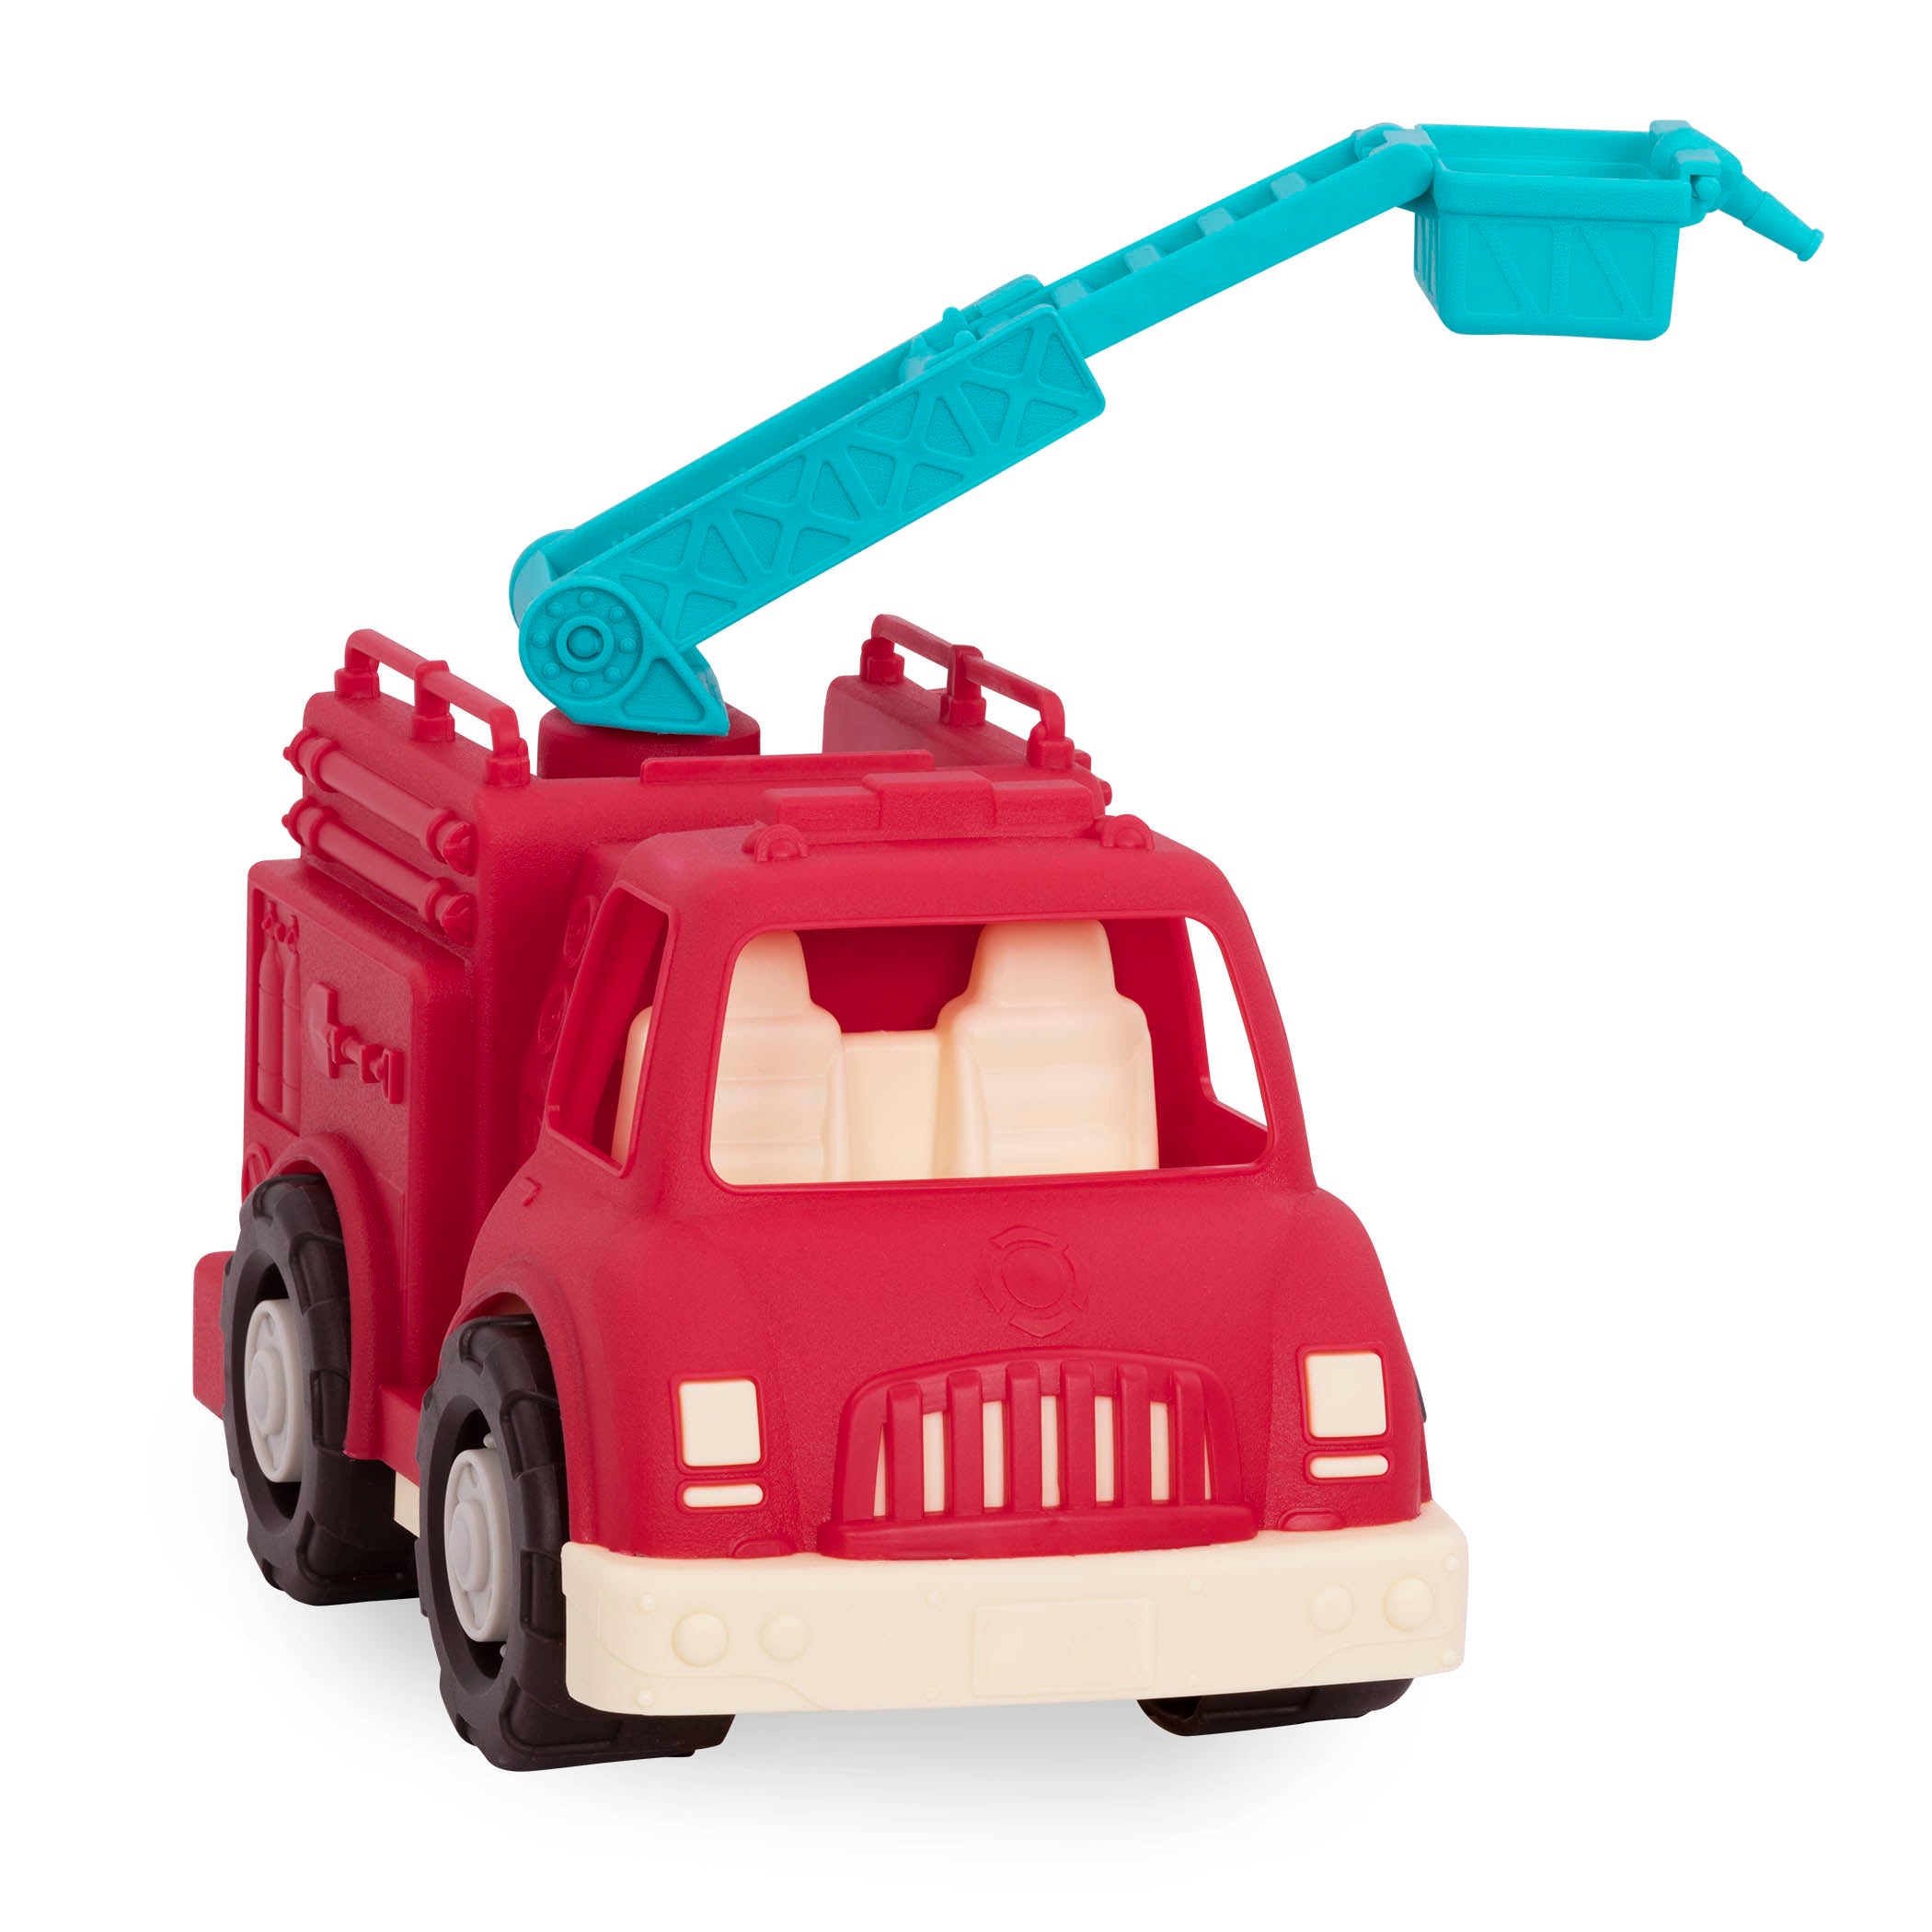 Toy fire truck.